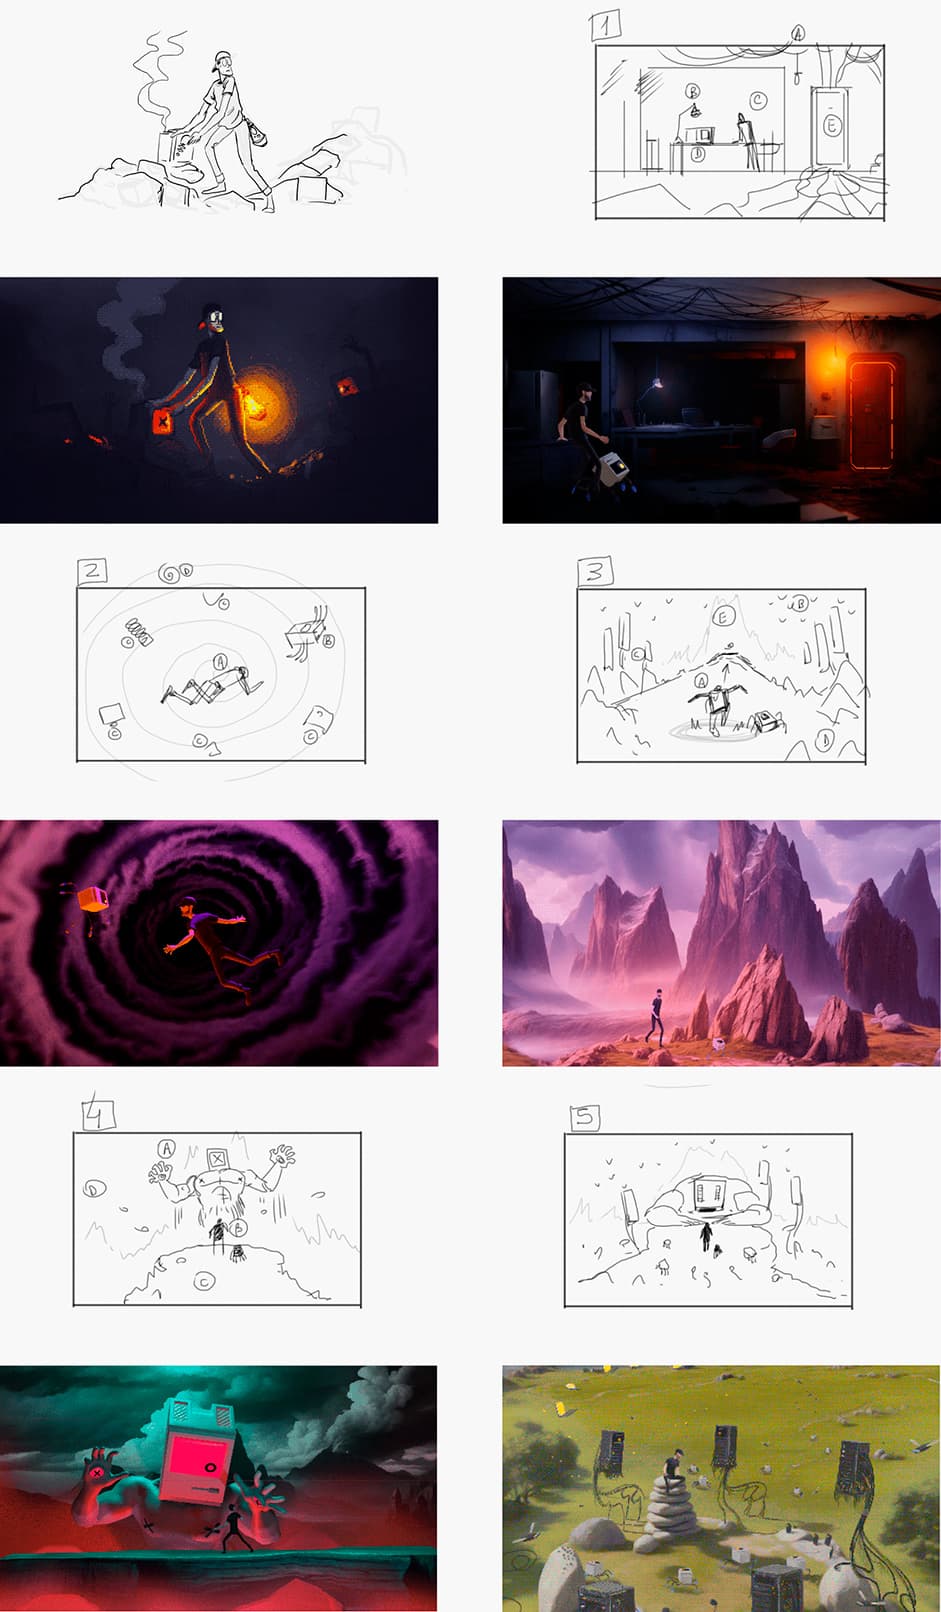 Storyboard from concept to finals